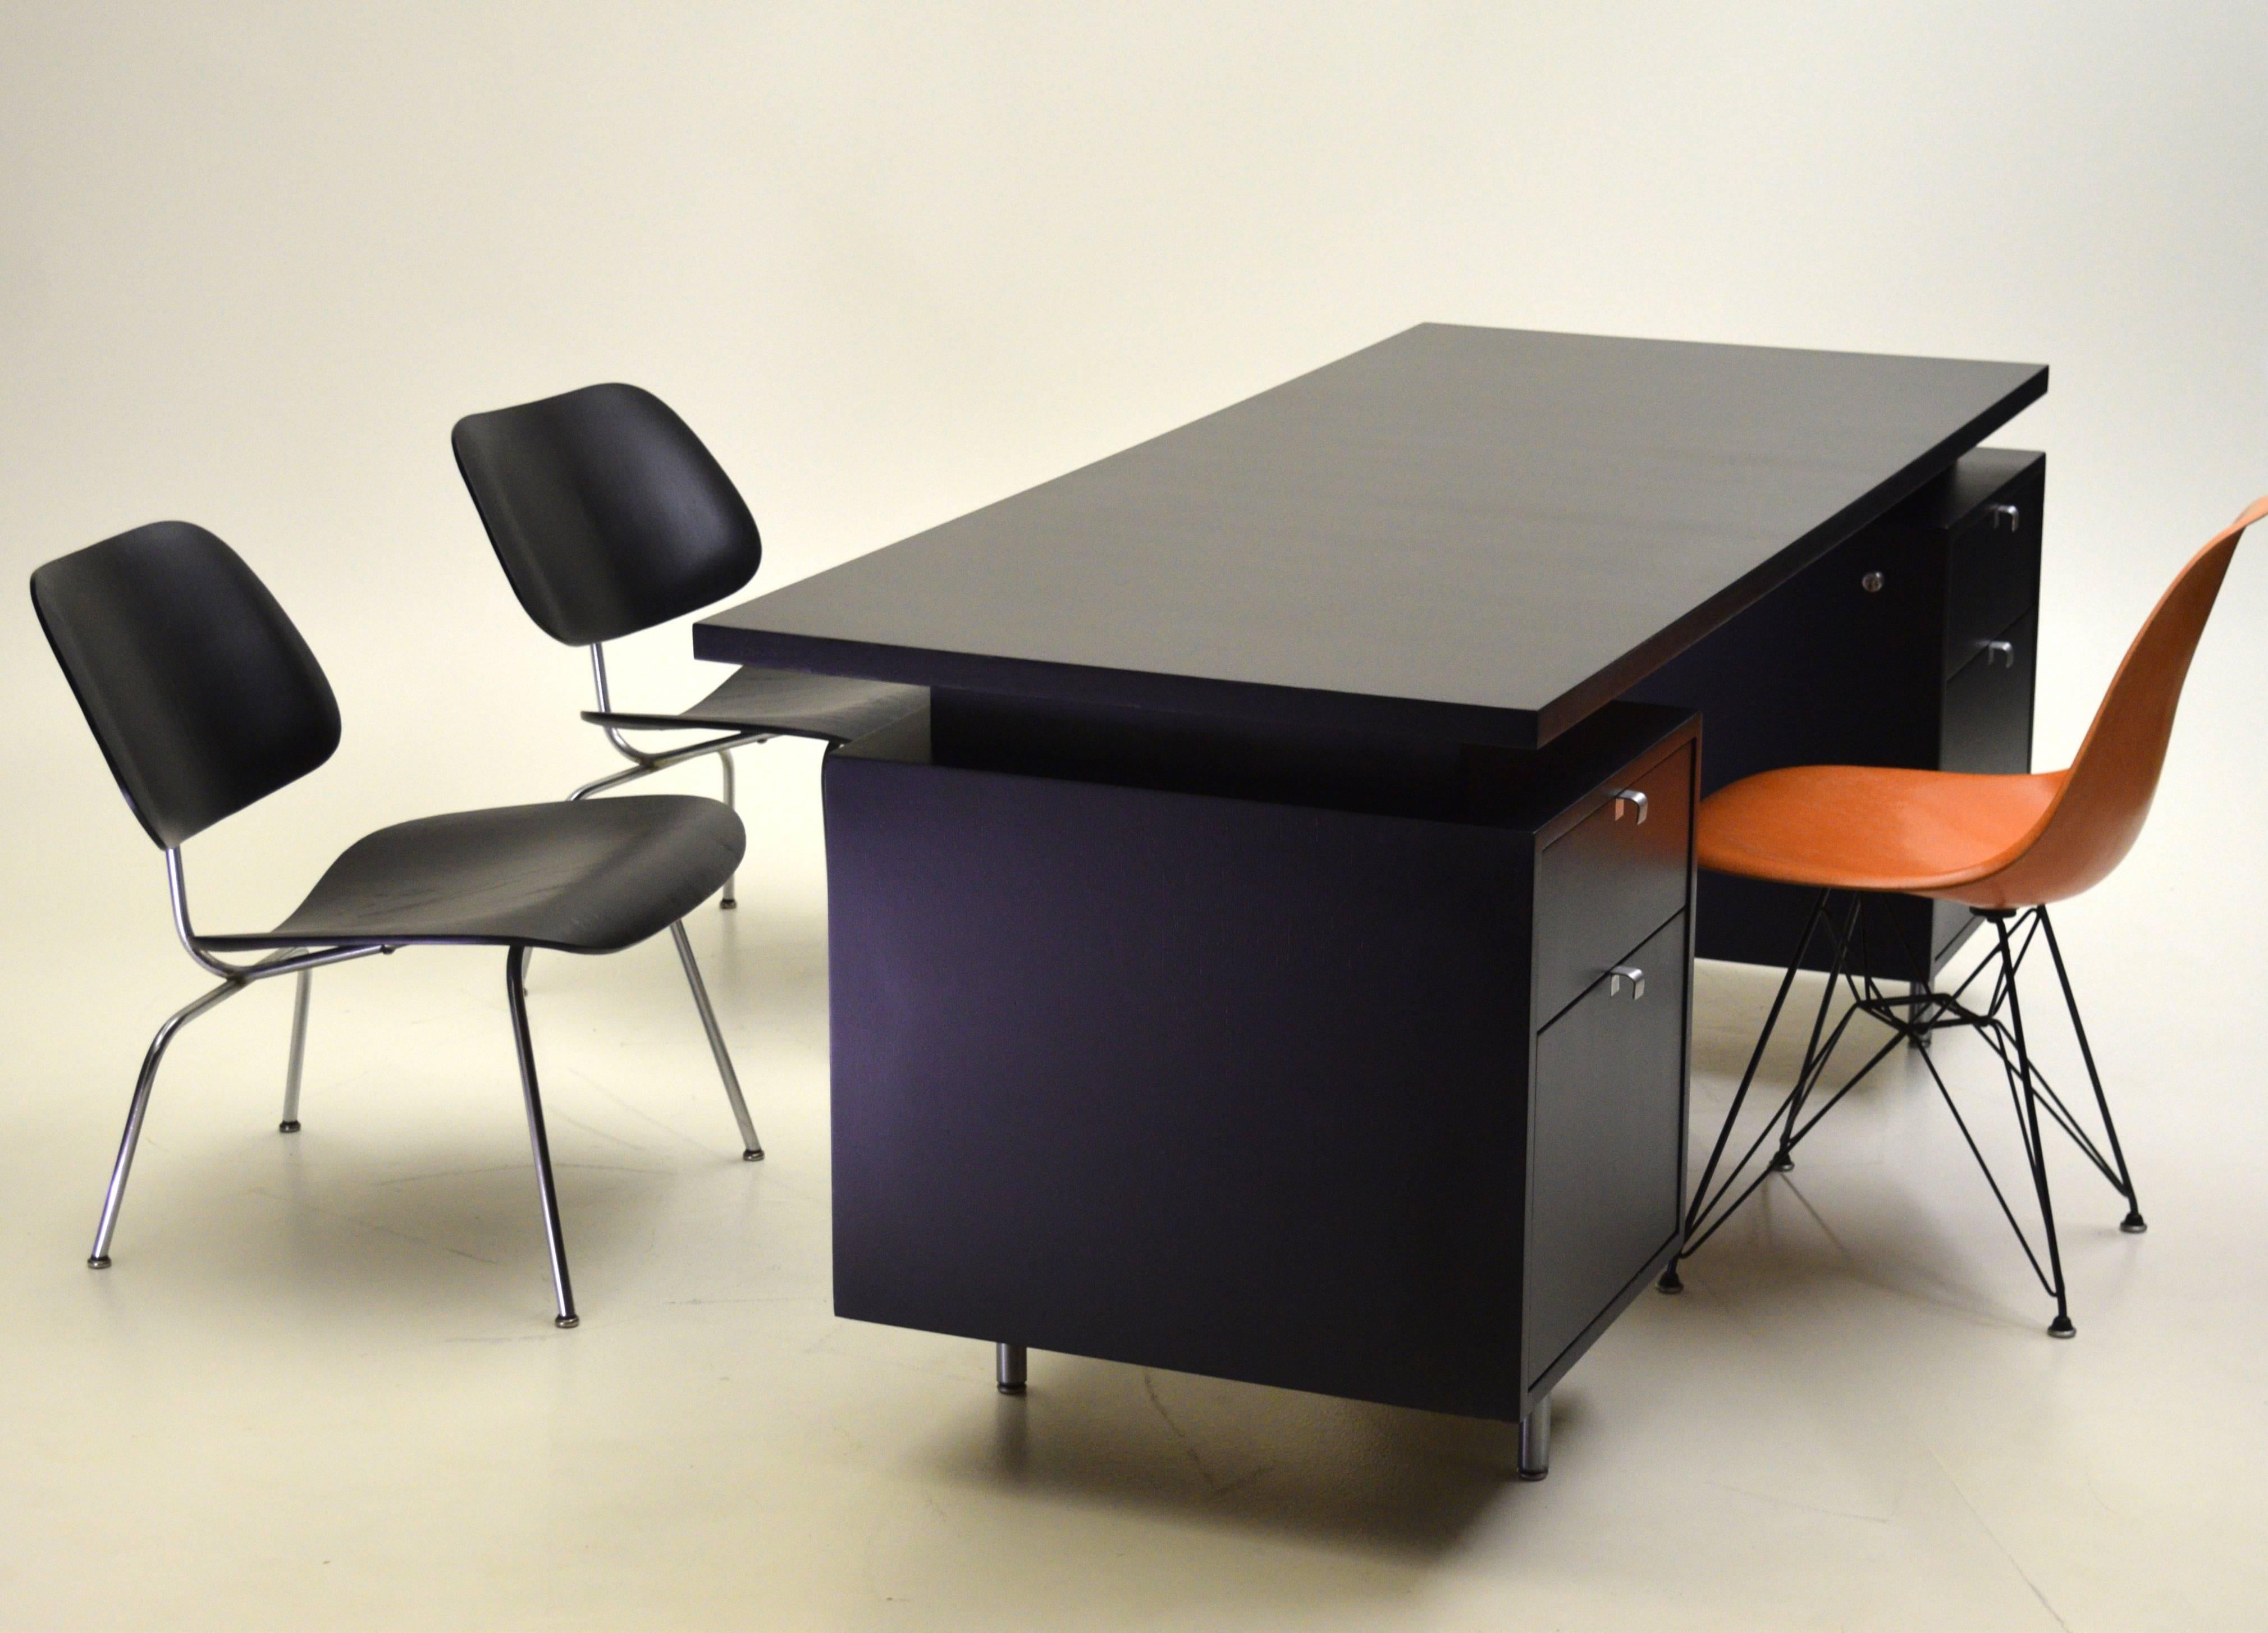 Bold and commanding, the George Nelson executive series desks combine functionality coupled with modernist lines for a timeless look.

Produced in the late 1950s-early 1960s this vintage custom ordered desk boasts two file drawers within the